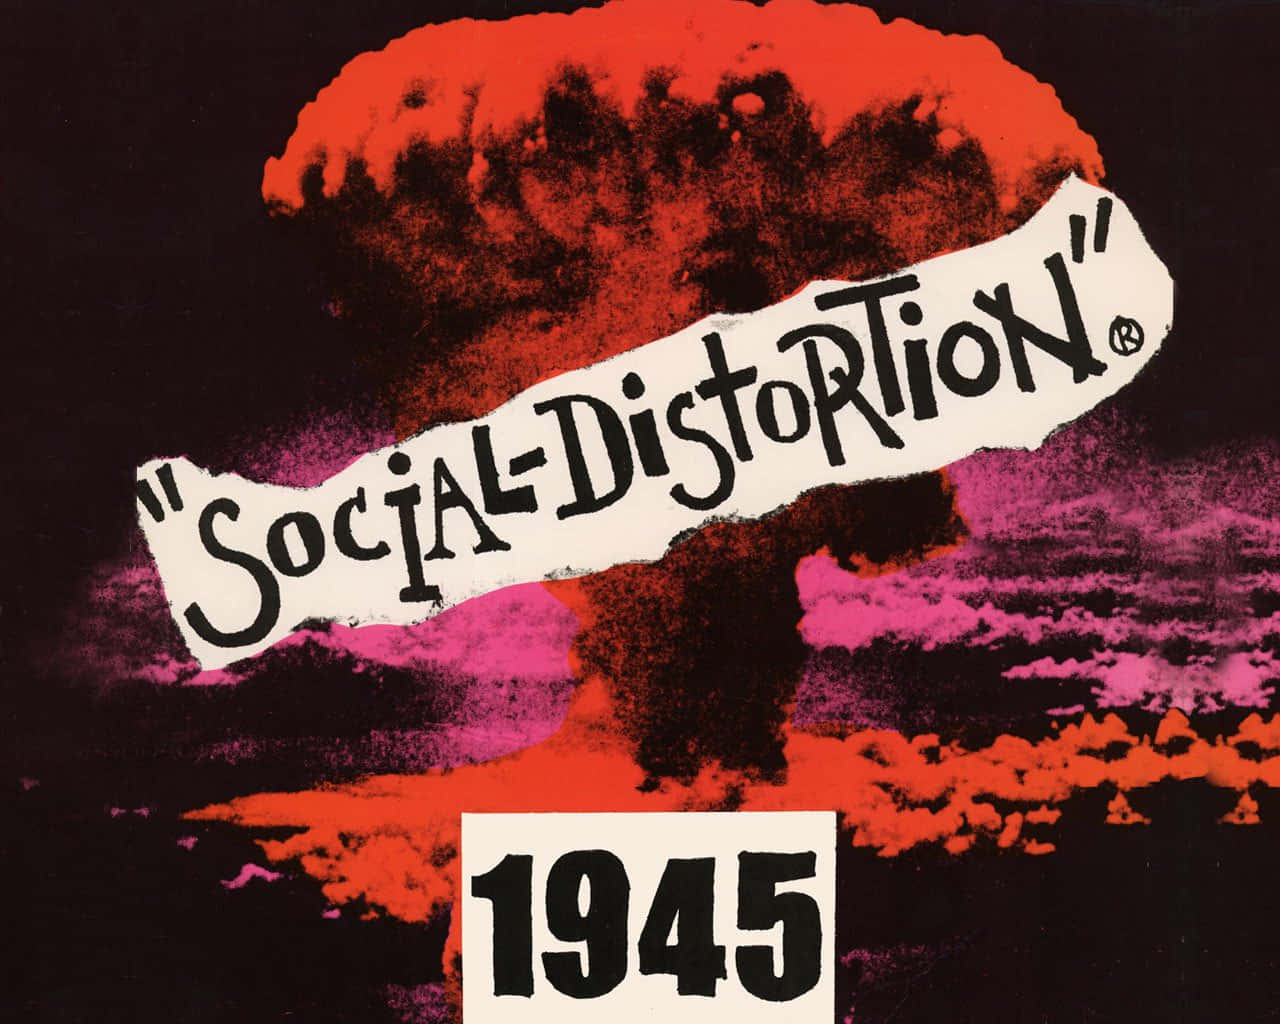 Socialdistortion 1945 Covert Art Can Be Translated To Italian As: 